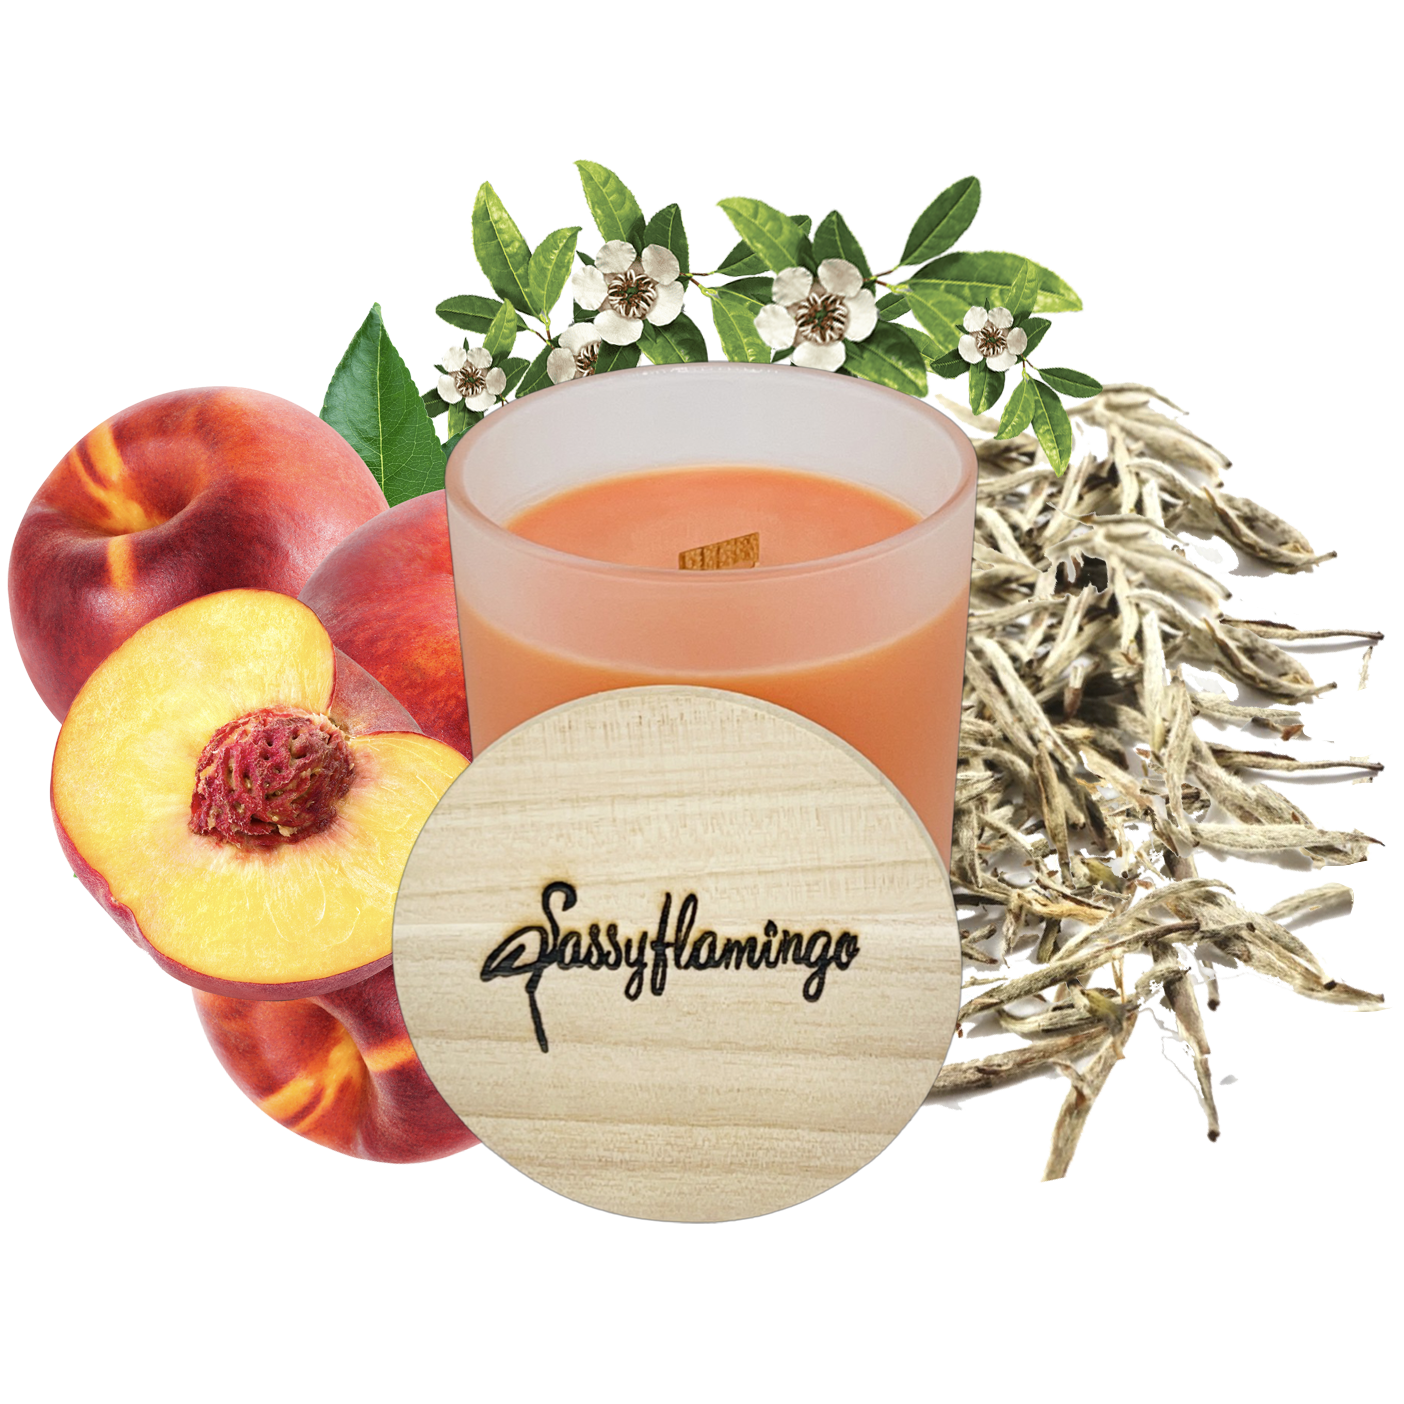 Peach Tea Sassy Signature 10oz Hand-Poured Crackling Wick Candle & Lid